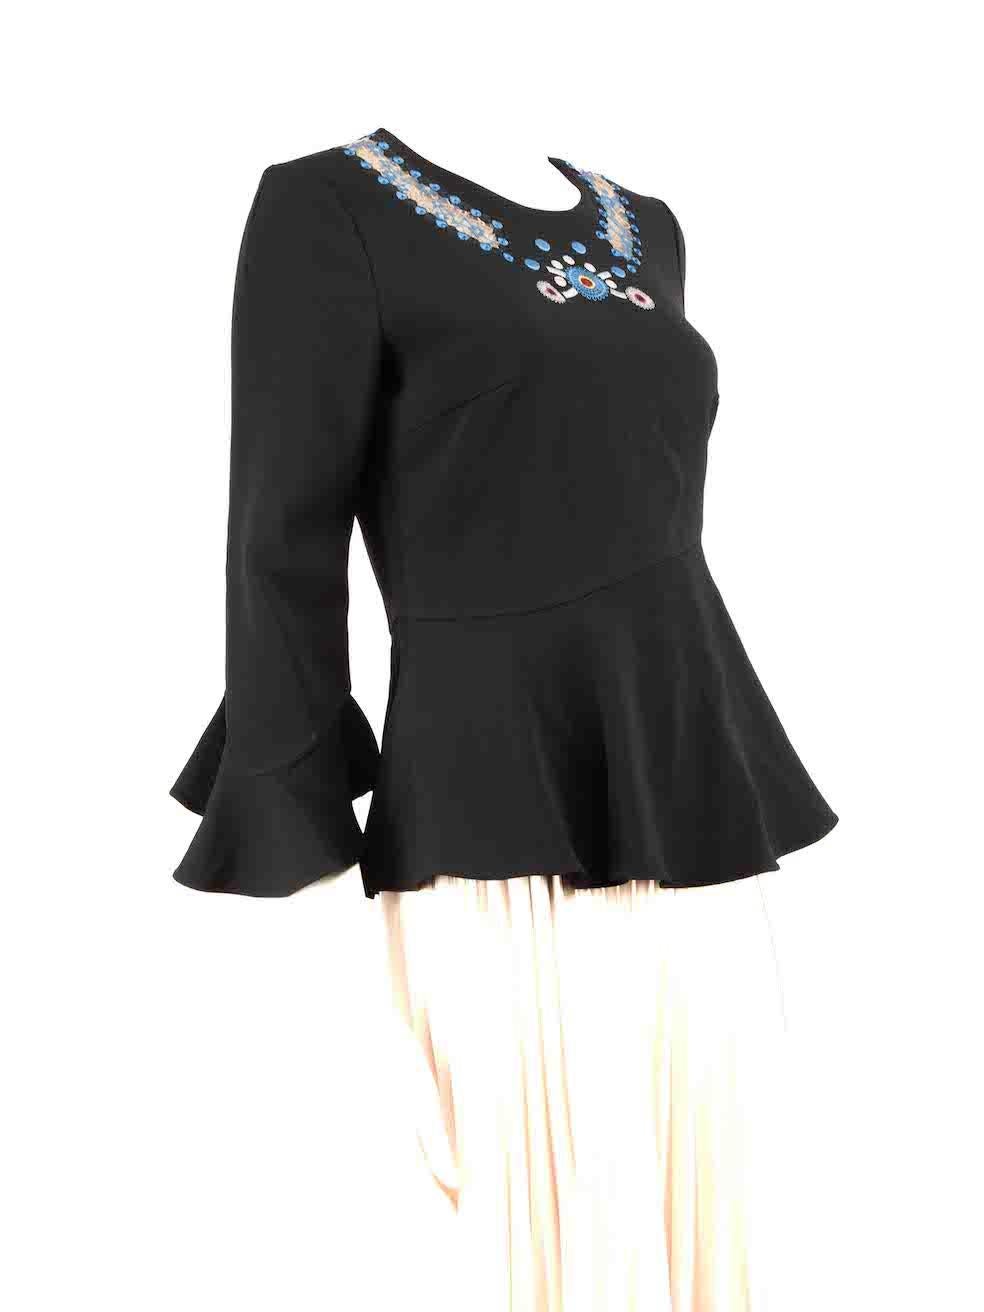 CONDITION is Very good. Hardly any visible wear to top is evident on this used Peter Pilotto designer resale item.
 
 Details
 Black
 Synthetic
 Top
 Long sleeves
 Round neck
 Blue embroidered neckline detail
 Flared hem
 Back zip fastening
 
 
